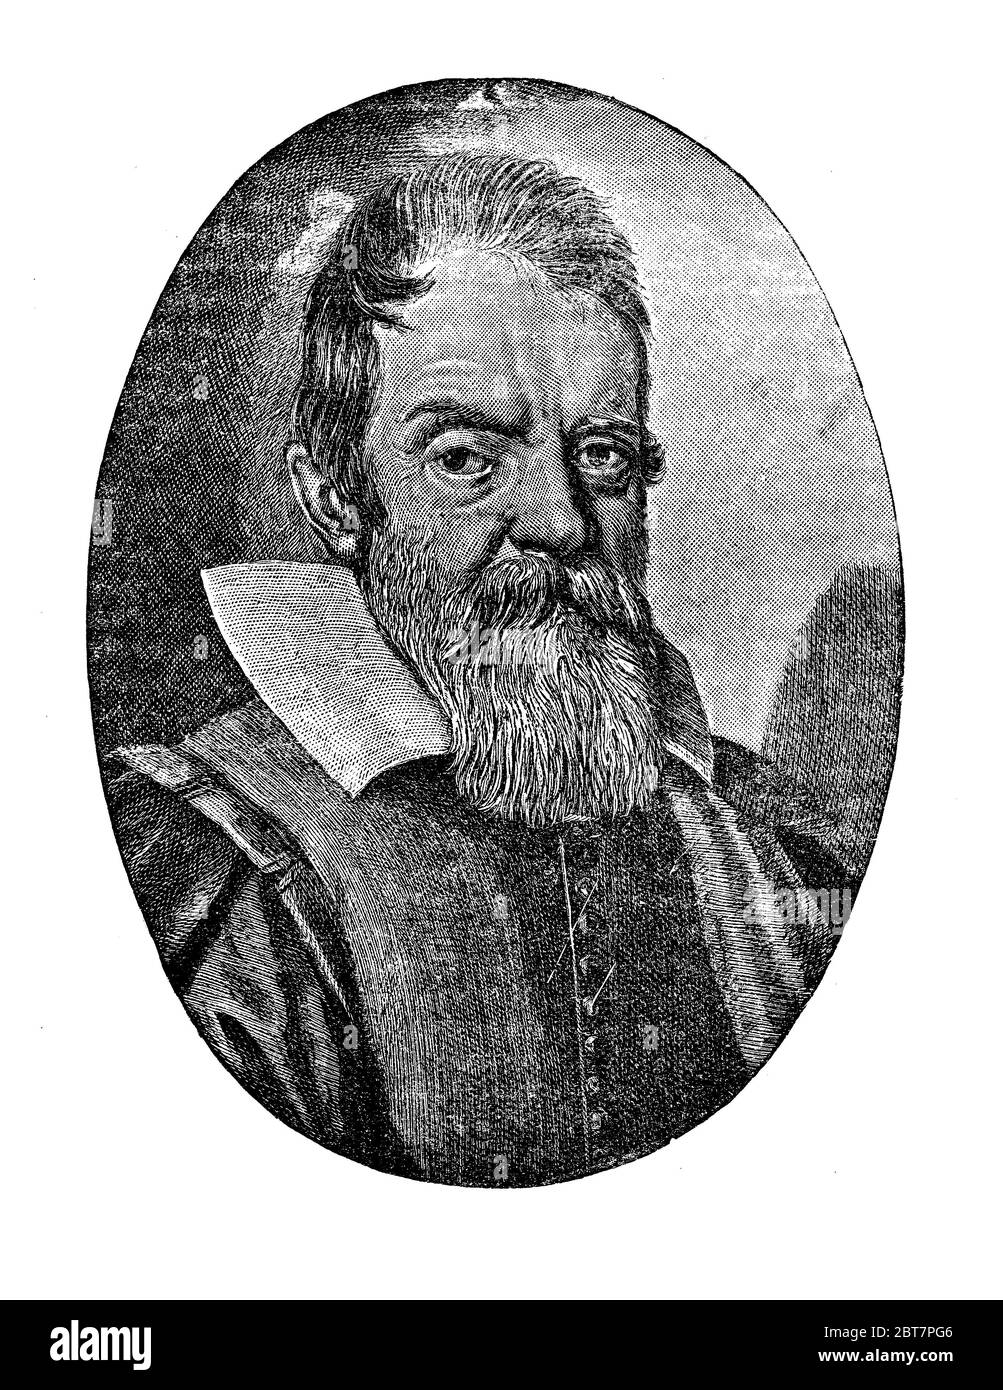 Engraving portrait of Galileo Galilei  (1564 - 1642), Italian astronomer, physicist and engineer,inventor and father of observational astronomy Stock Photo